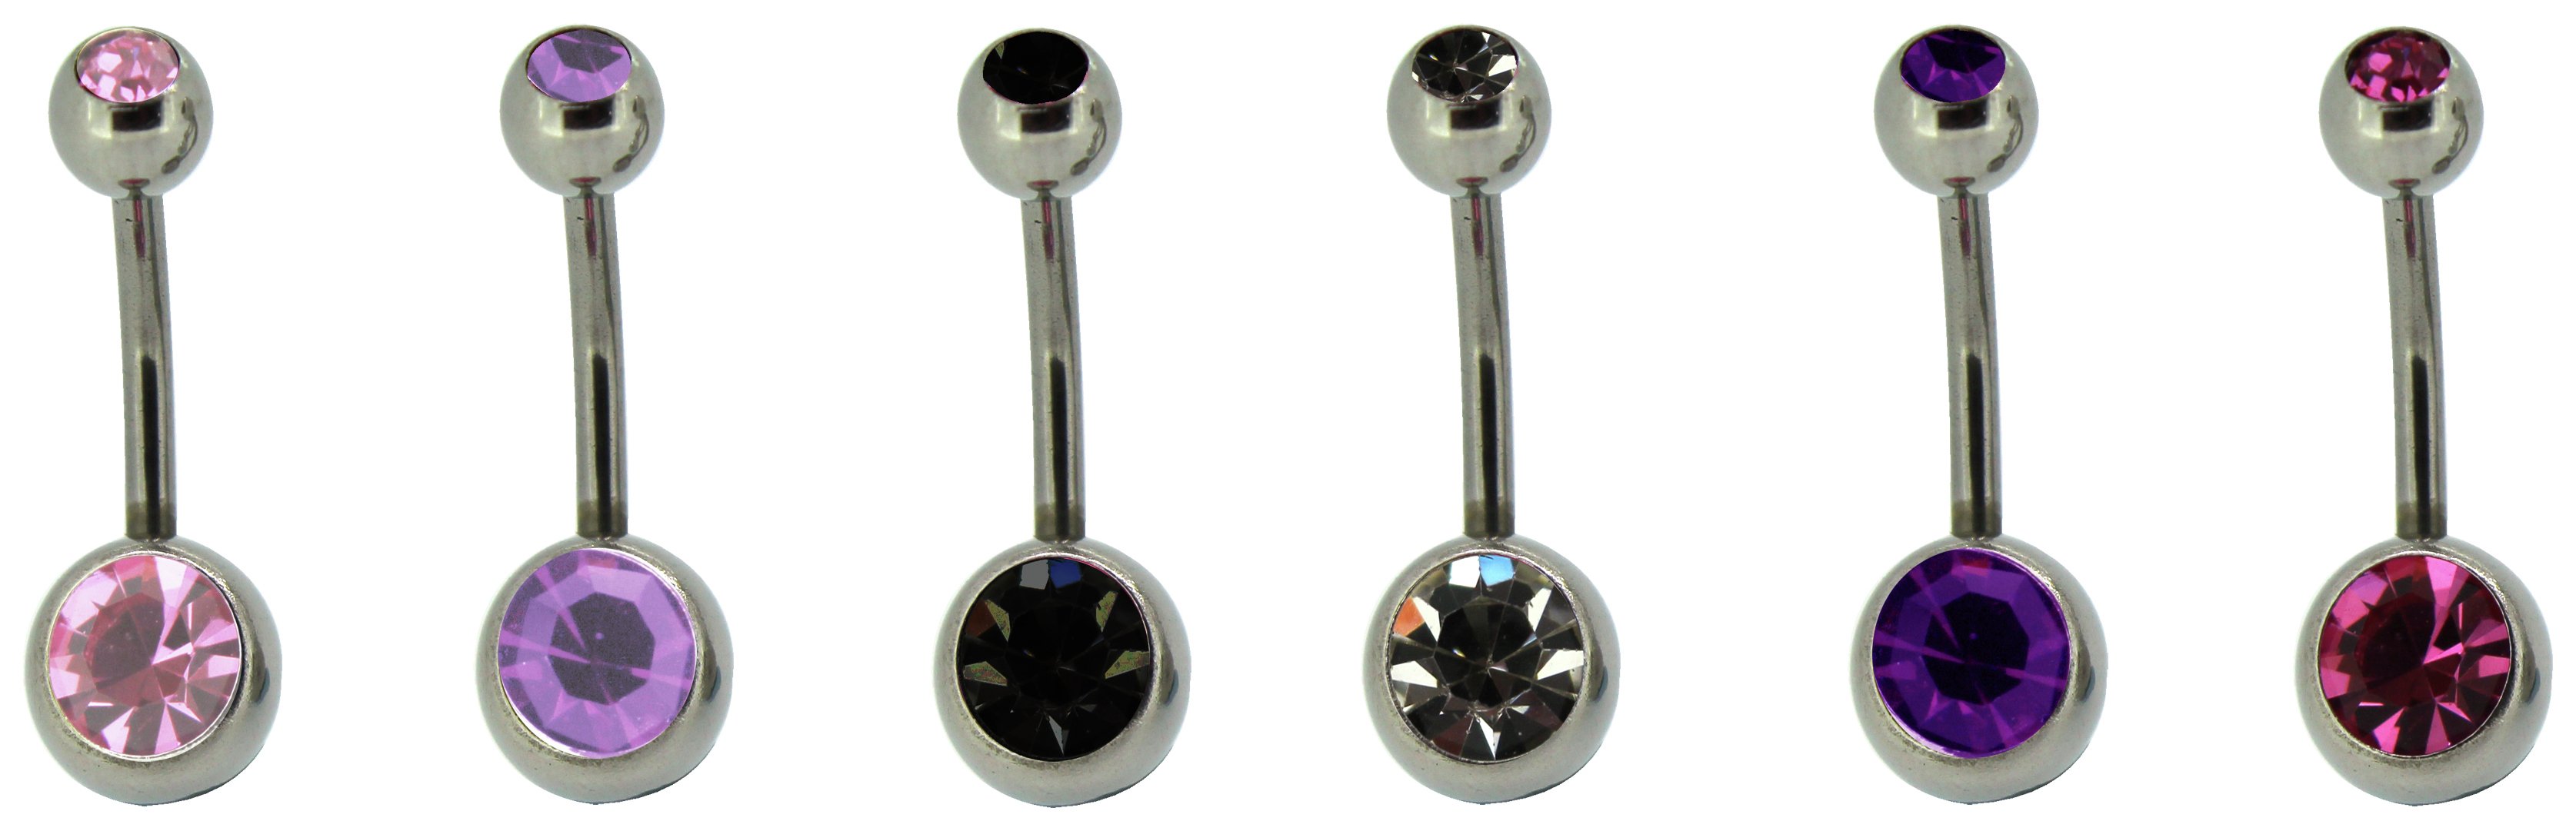 Link Up Stainless Steel Crystal Ball Belly Bars - Set of 6